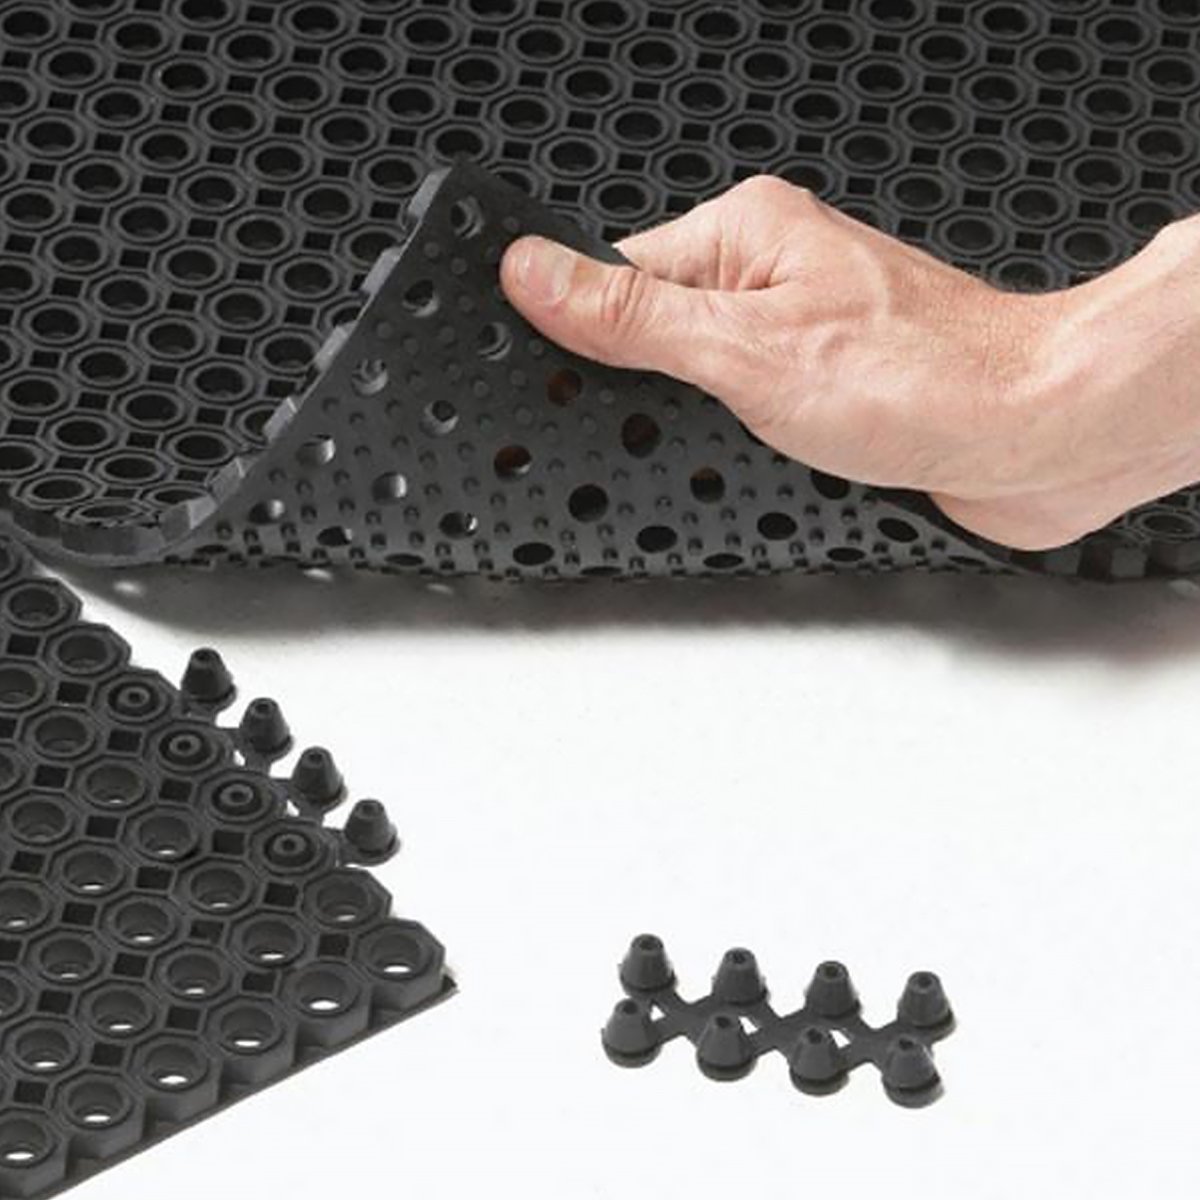 Ring rubber mat 75x100cm small holes